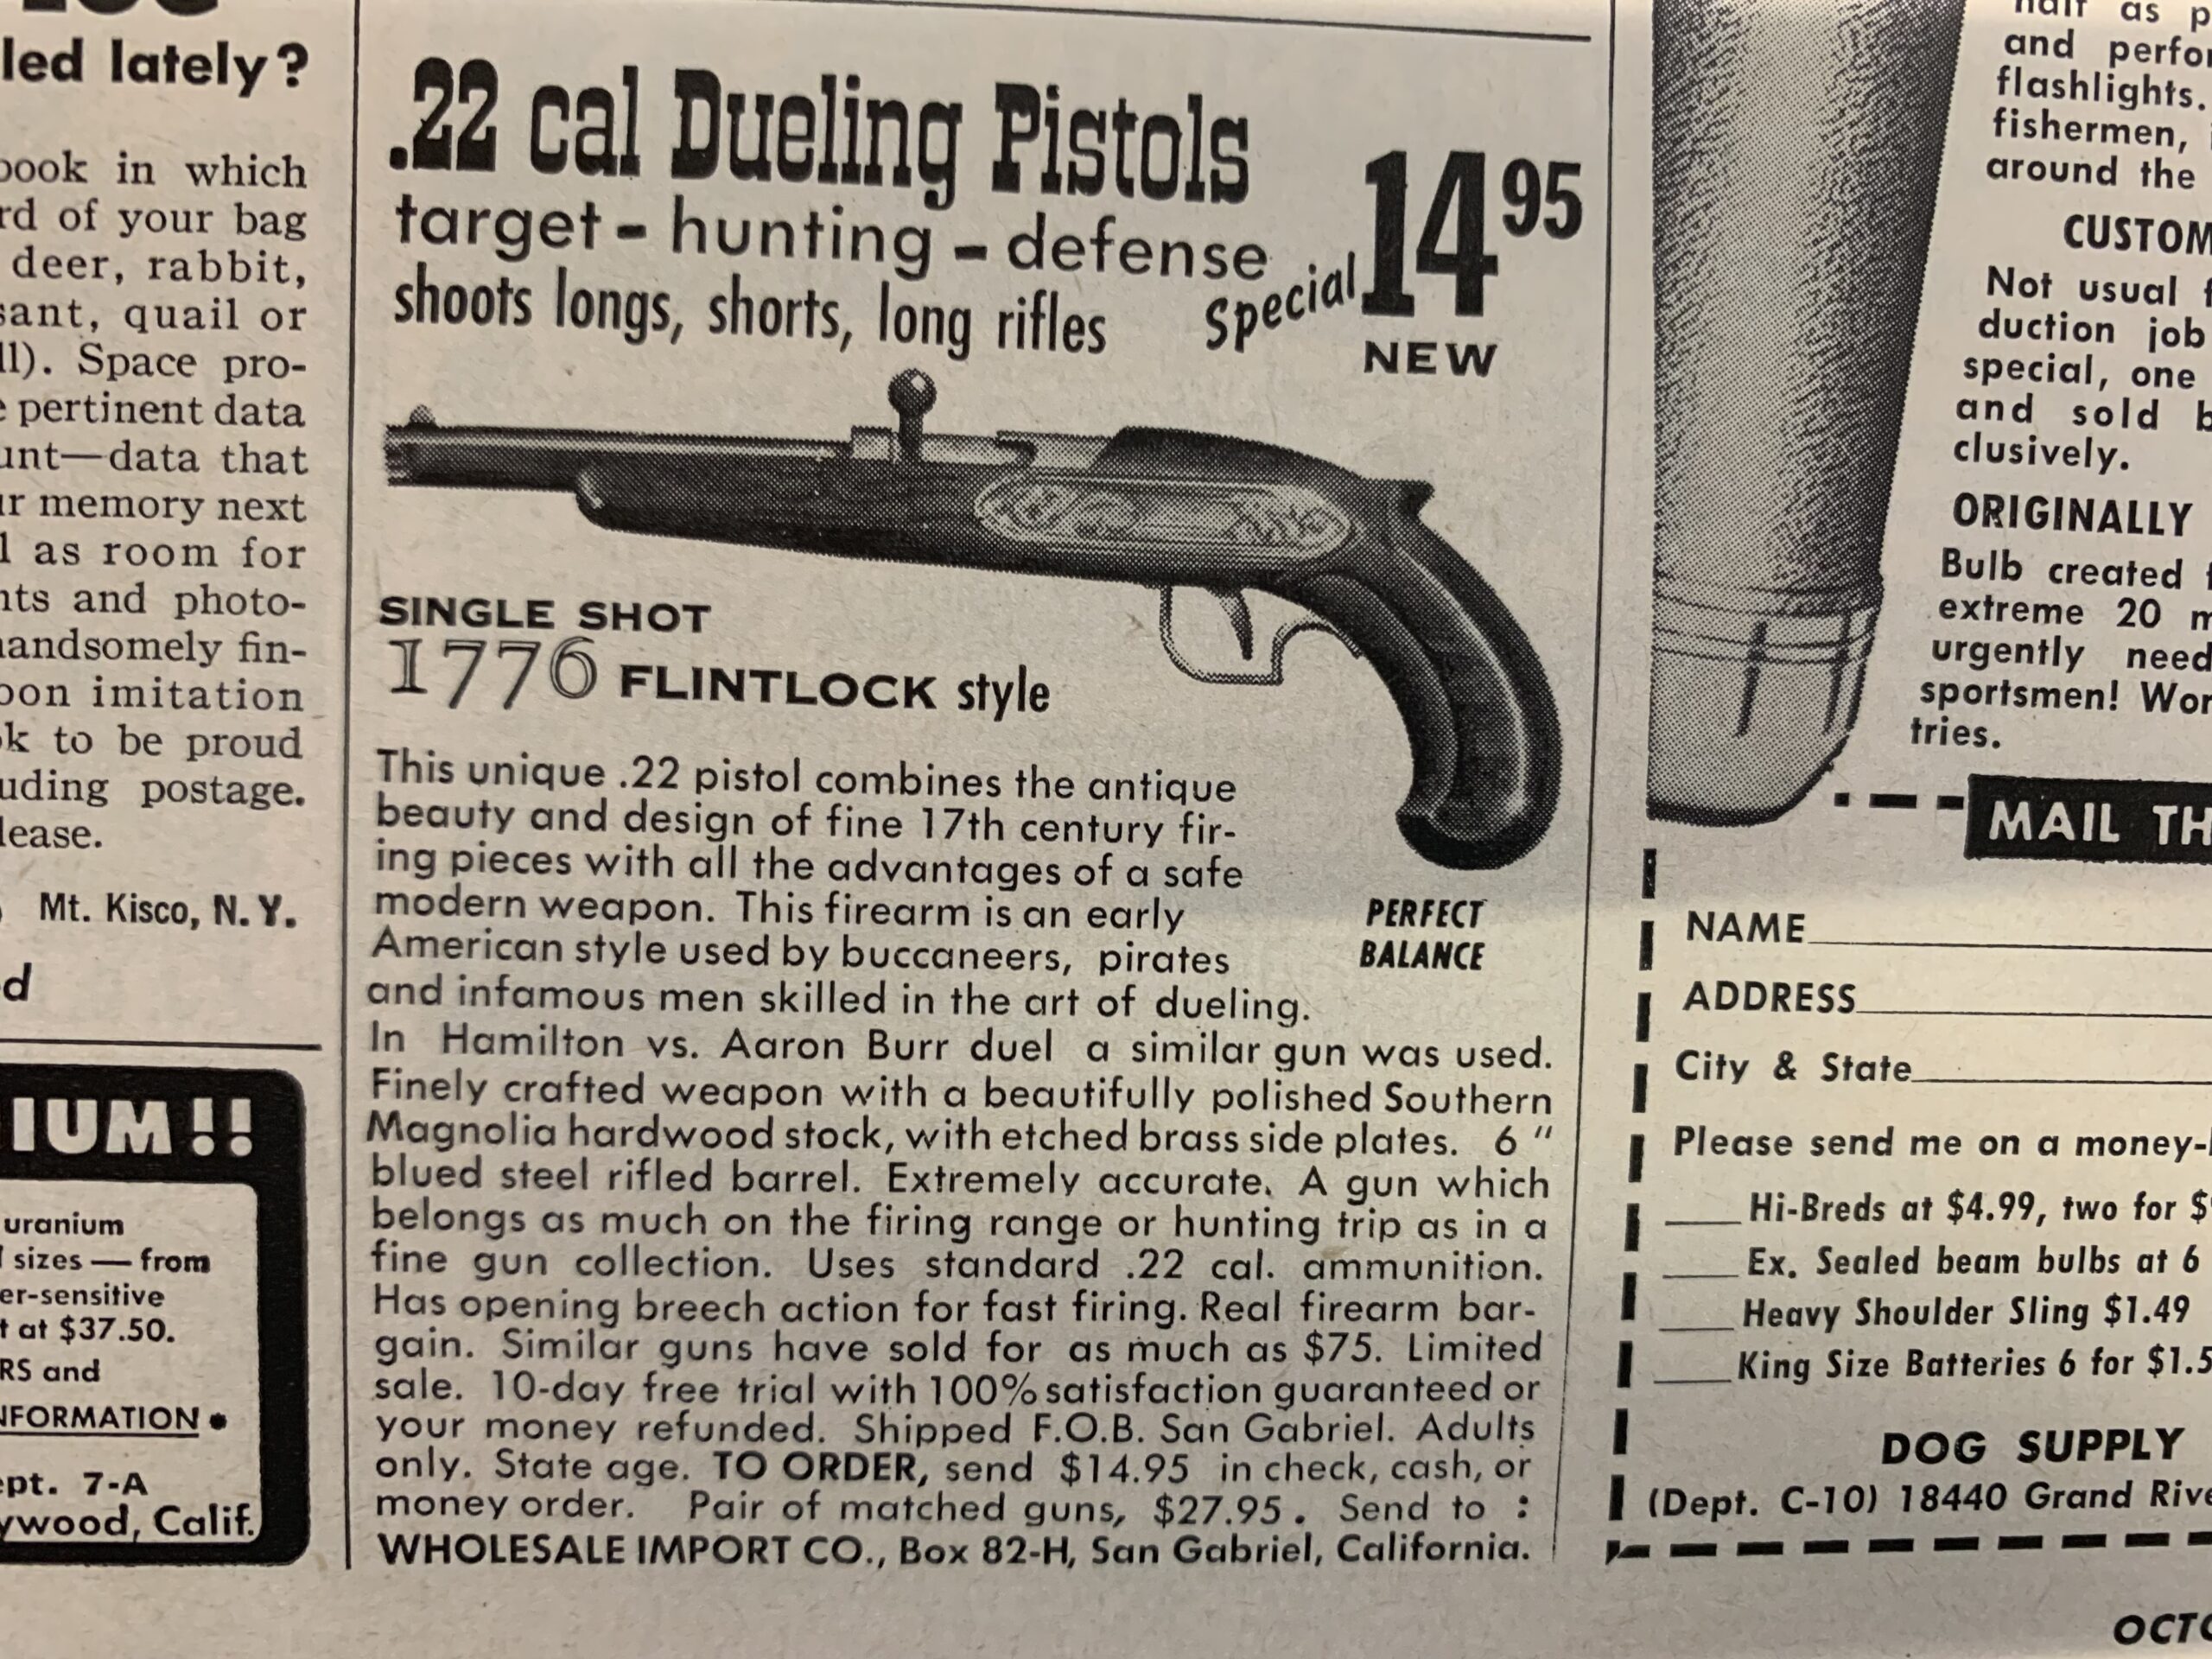 Vintage ad for .22 cal dueling pistols